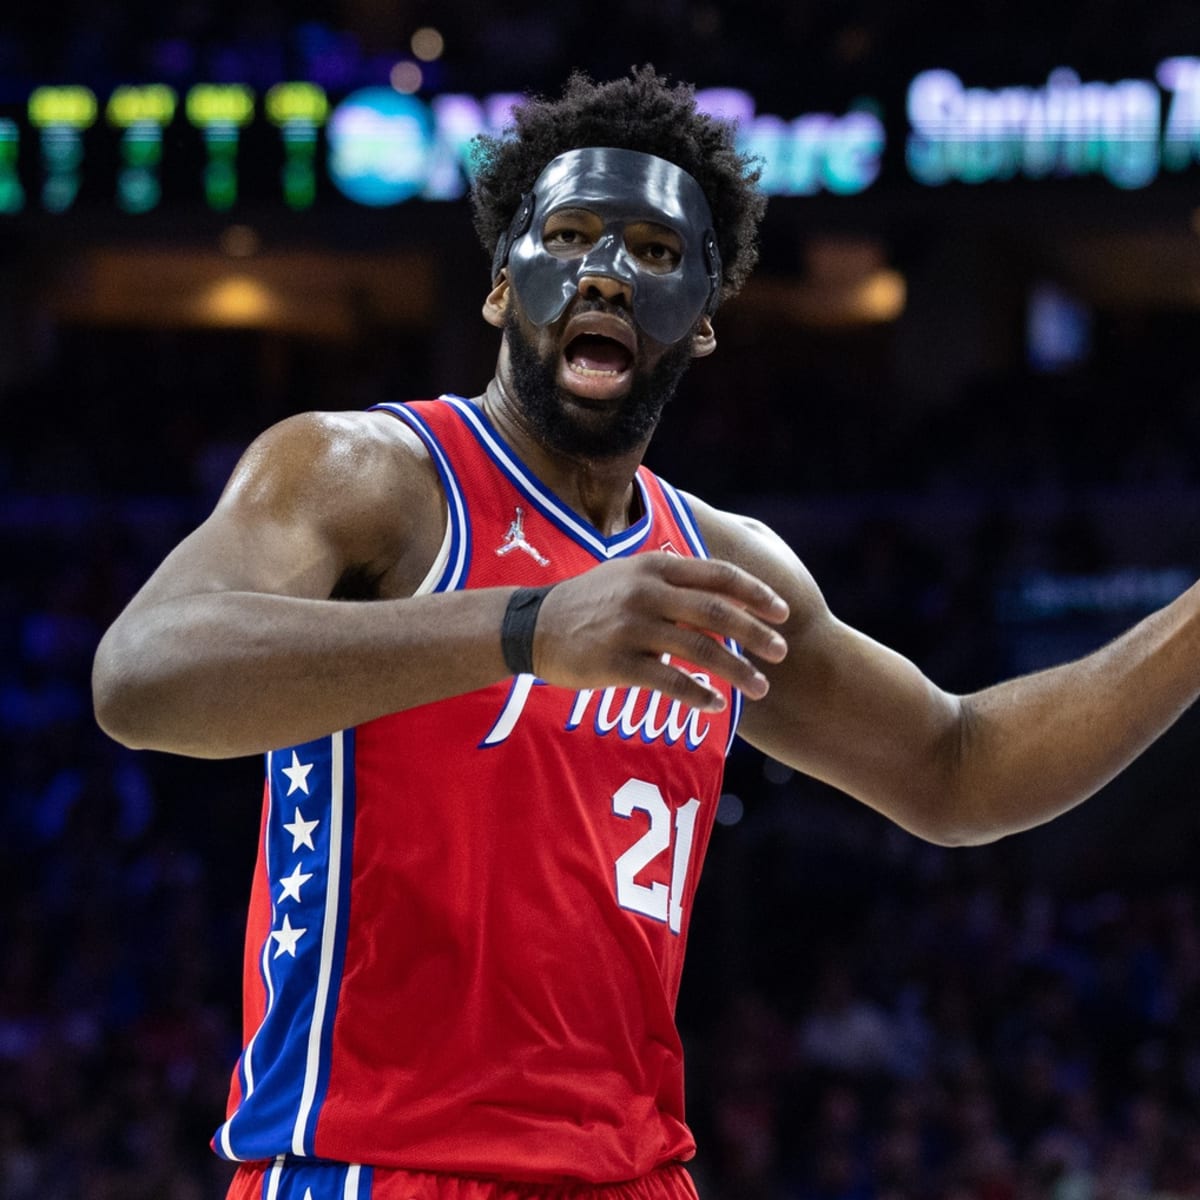 Watch NBA Playoffs Brooklyn Nets at Philadelphia 76ers Live stream - How to Watch and Stream Major League and College Sports